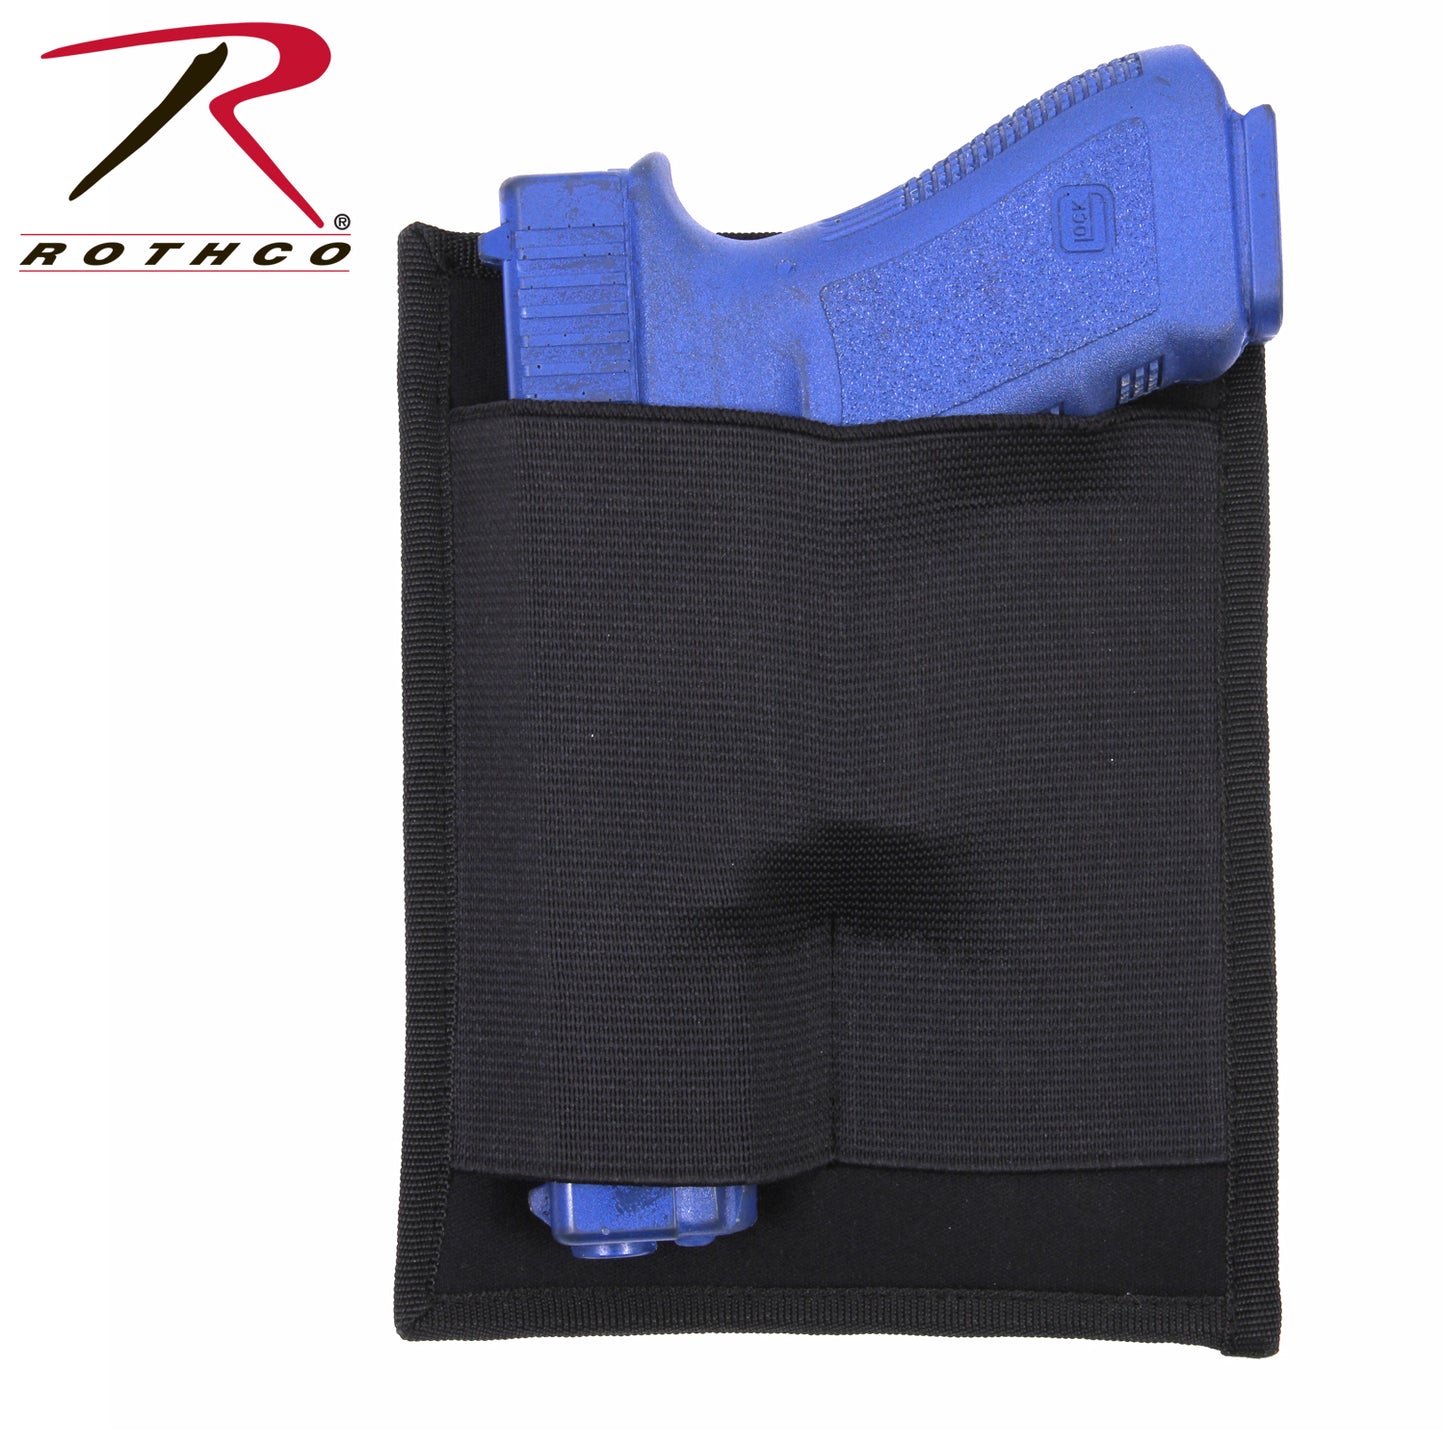 Rothco Concealed Carry Holster Panel